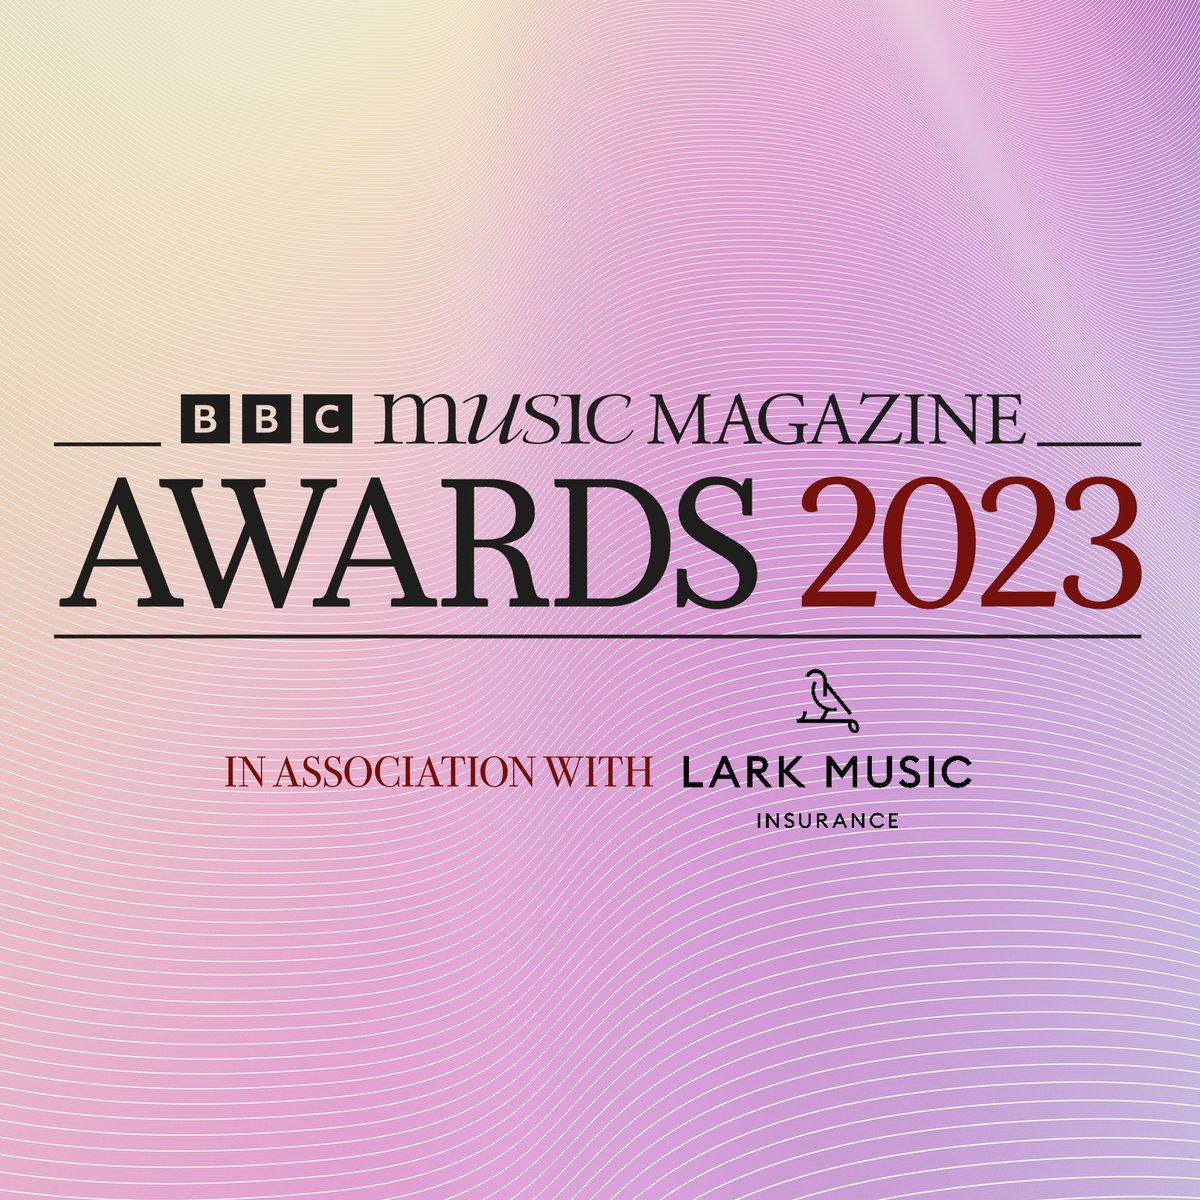 Great to see two of our labels nominated for the #BBCMMAwards
ECM are nominated in the Instrumental category (Robert Levin - Mozart Complete Piano Sonatas) & Dux are nominated in the Orchestral category (Bacewicz Works for Chamber Orchestra Volume 3).
classical-music.com/awards/bbc-mus…